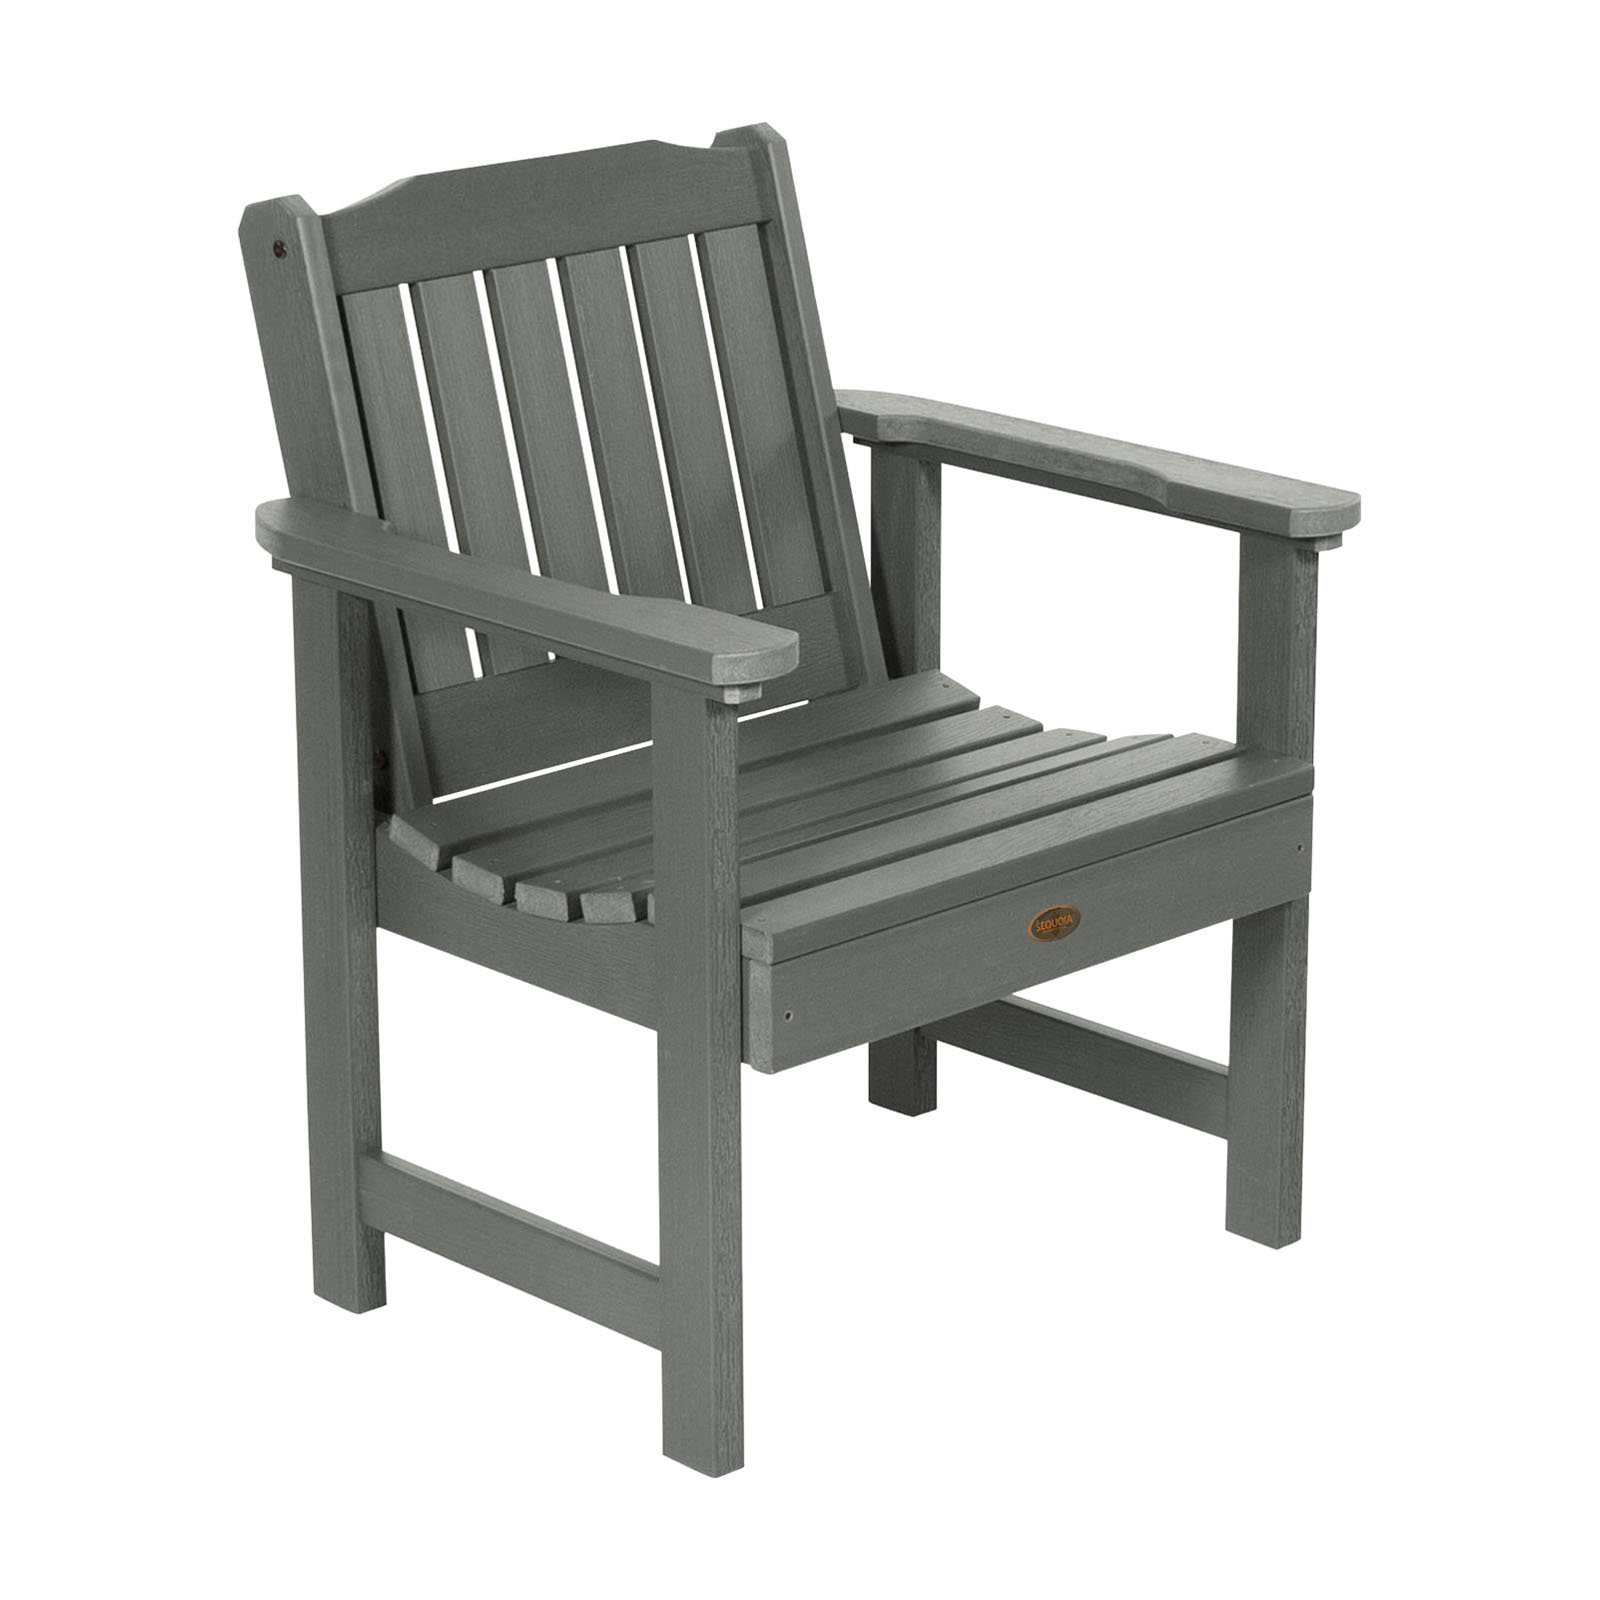 The Sequoia Professional Commercial Grade Springville Lounge Chair - image 1 of 2